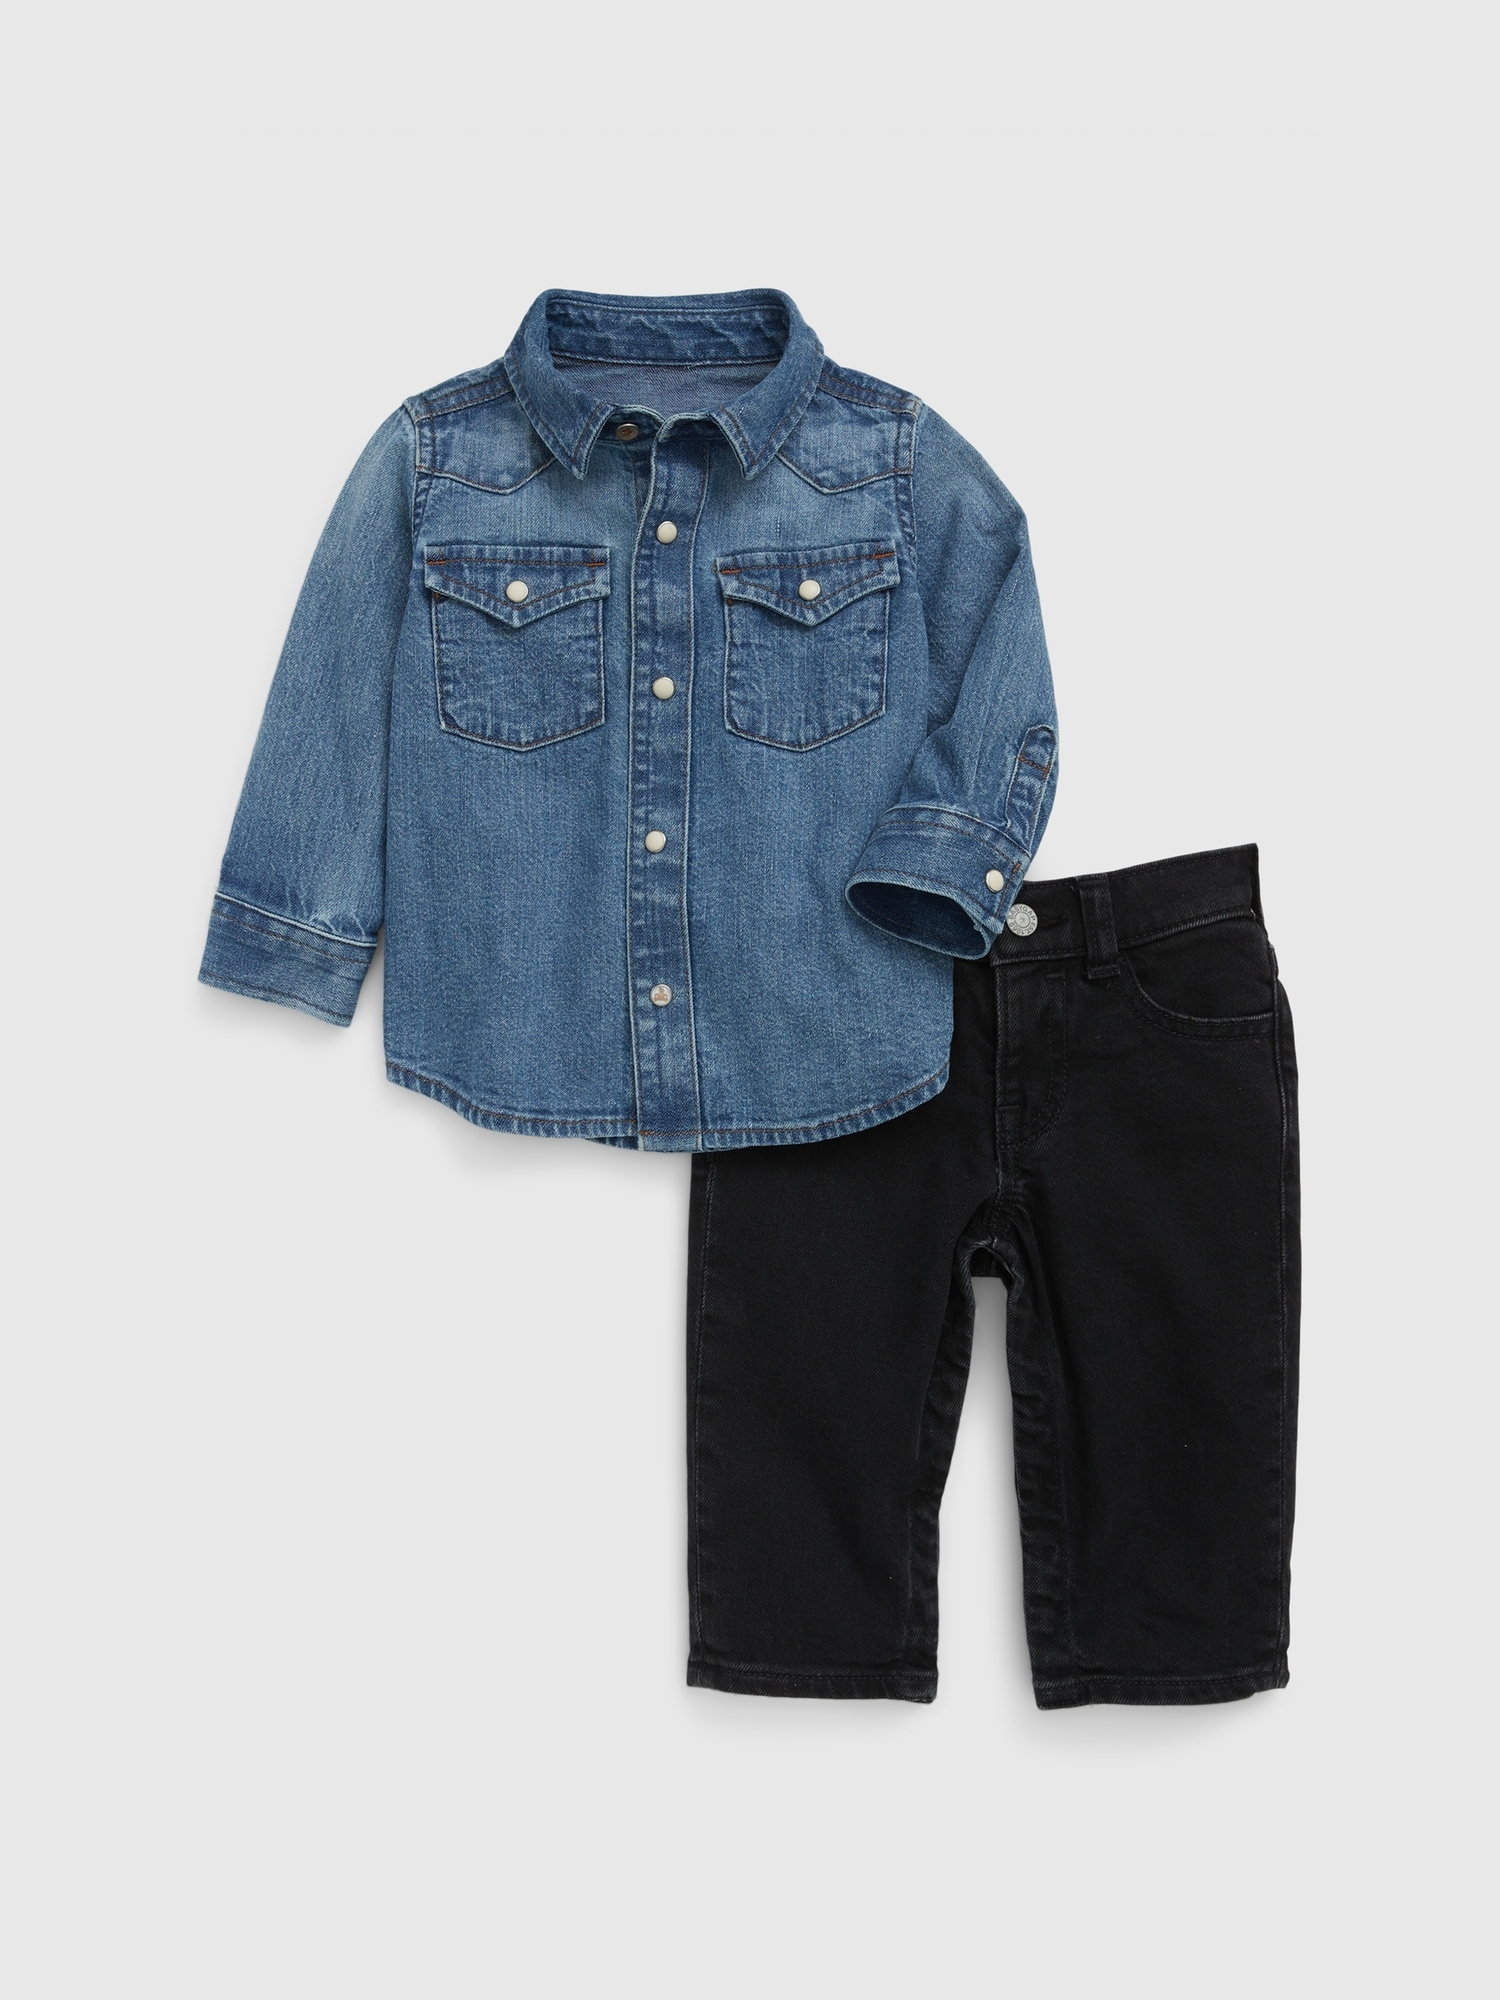 Baby Western Denim Outfit Set